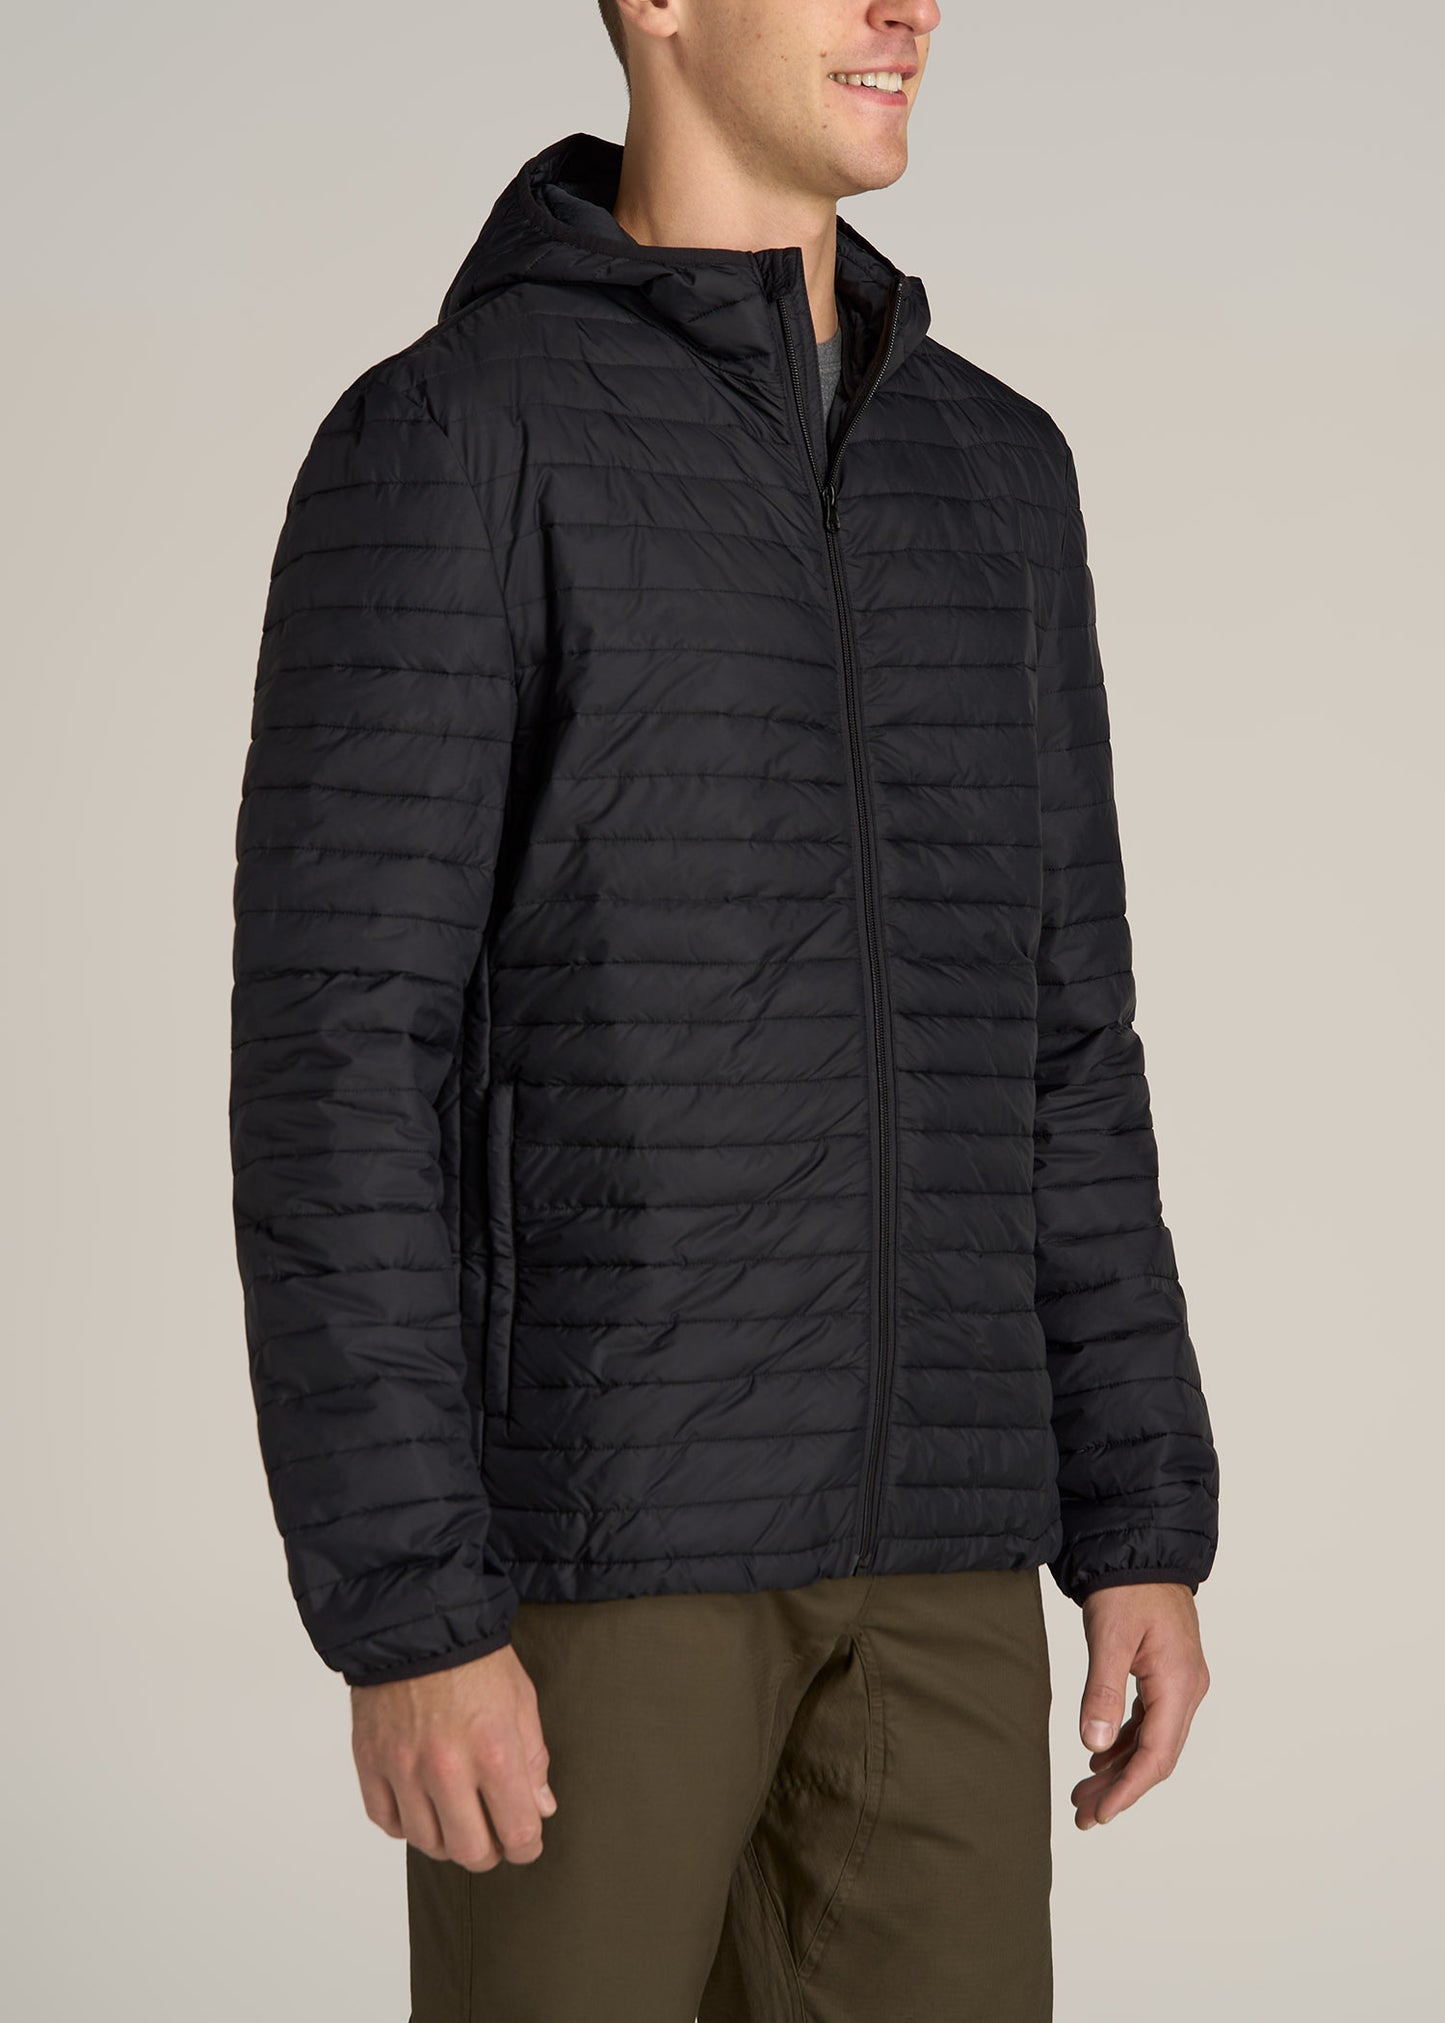 Tall Men's Packable Puffer Jacket in Black